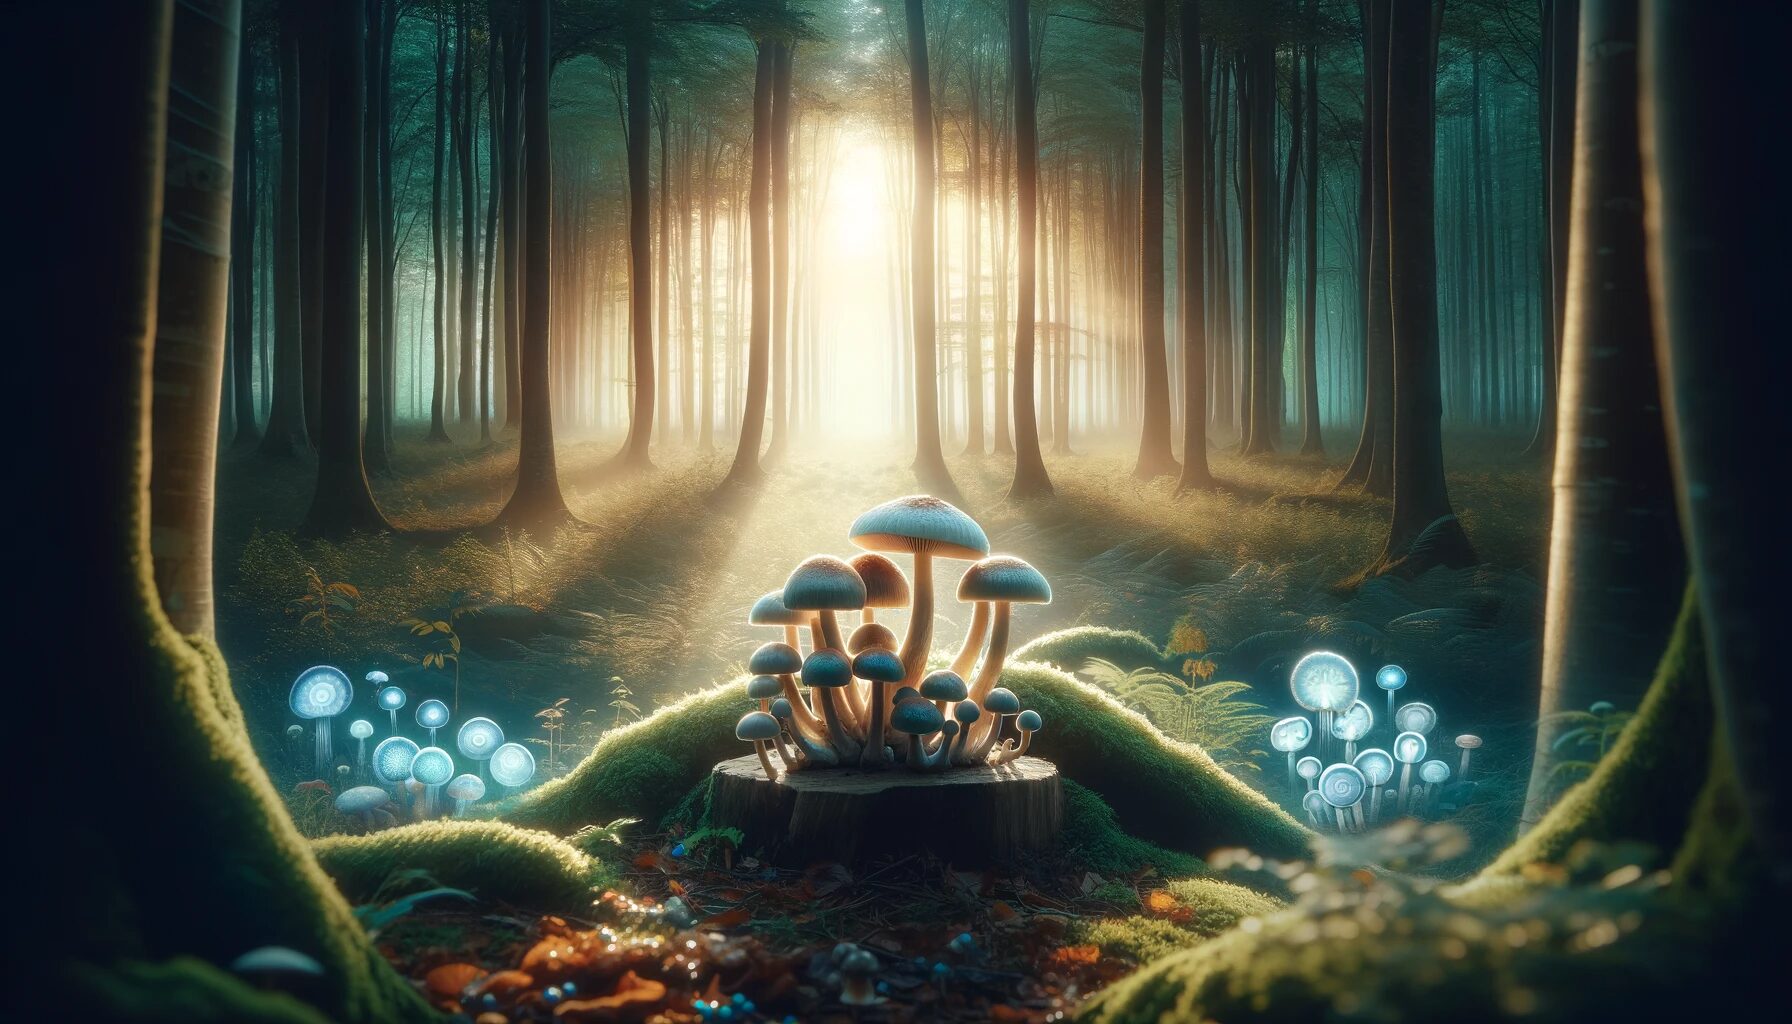 Mushrooms for Anxiety: The Potential Power of Psilocybin